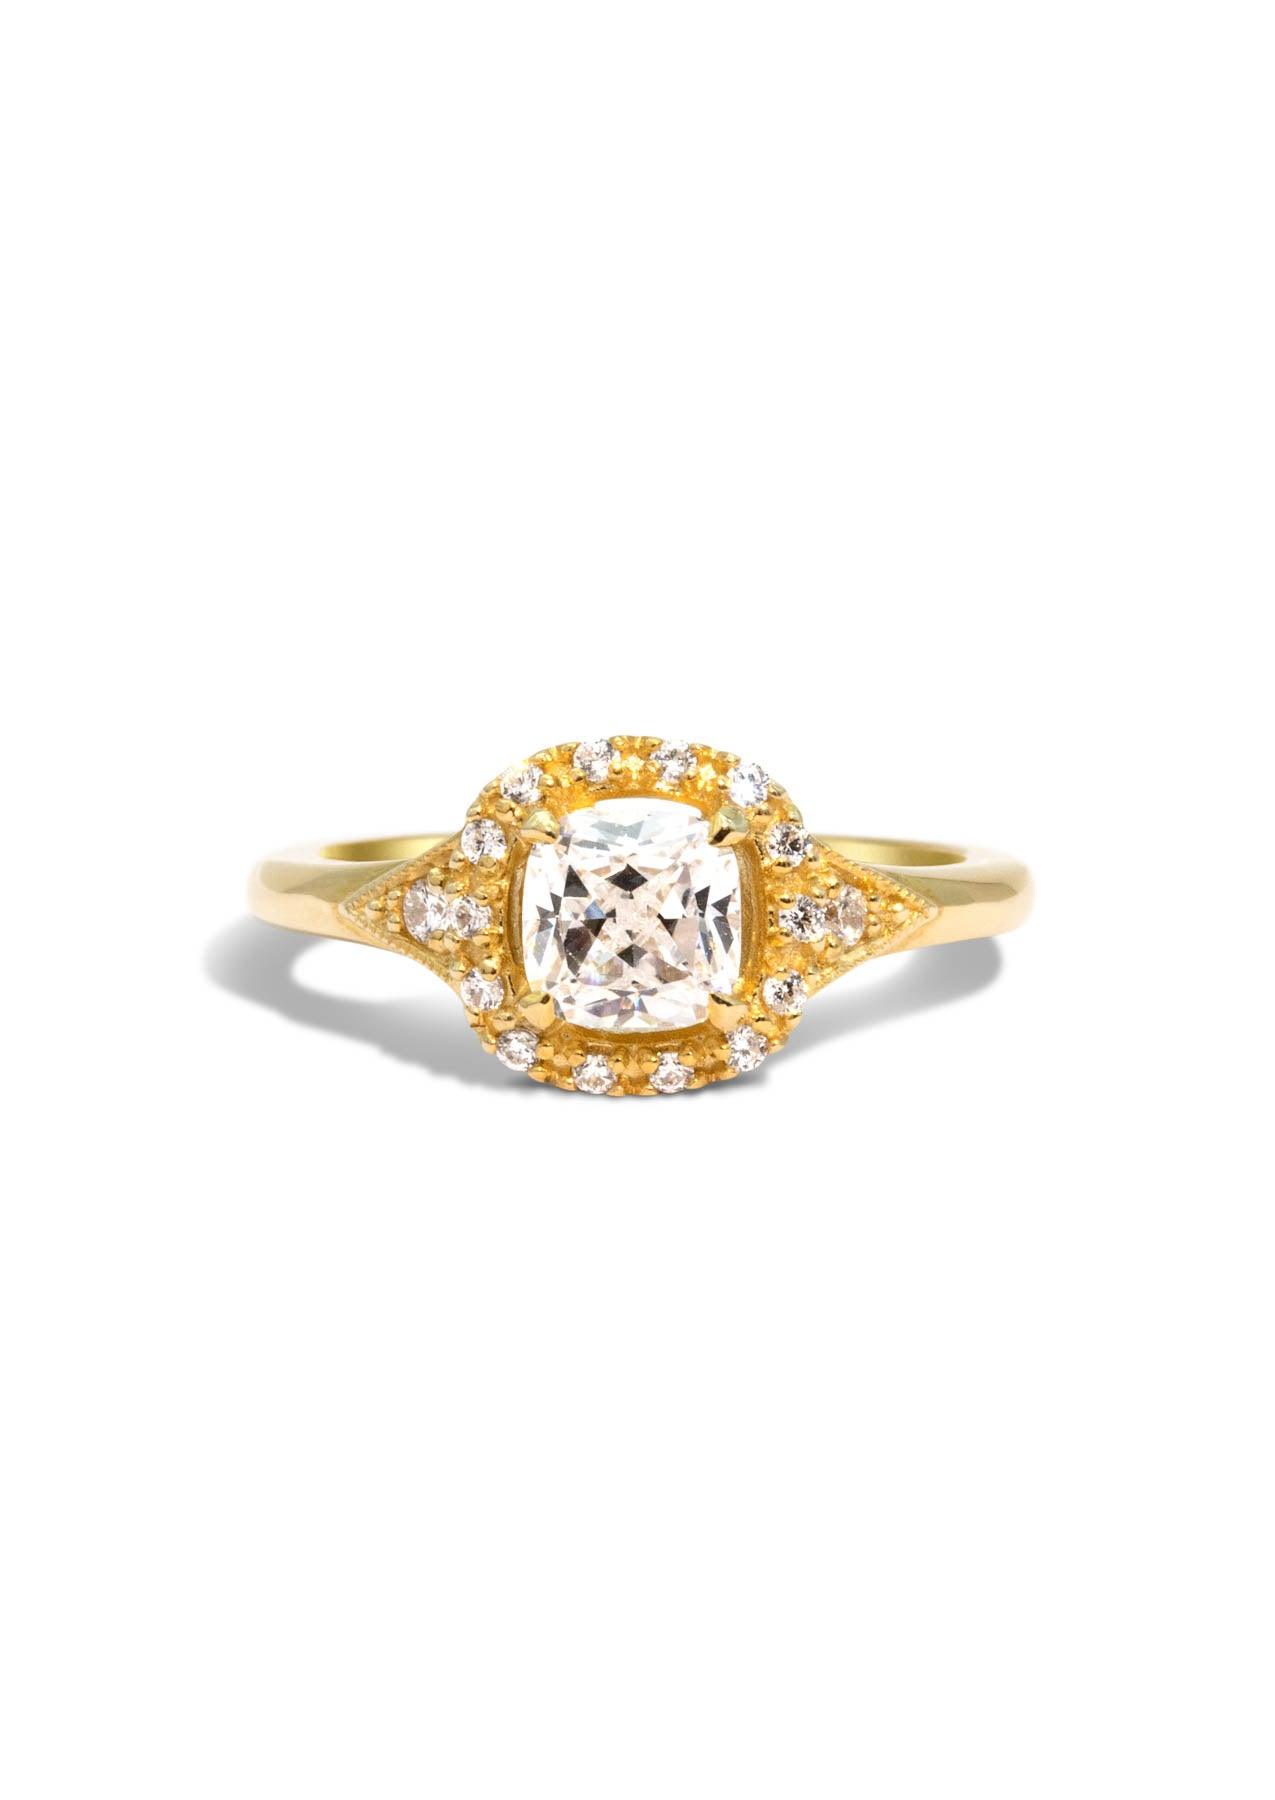 The Eliza Yellow Gold Cultured Diamond Ring